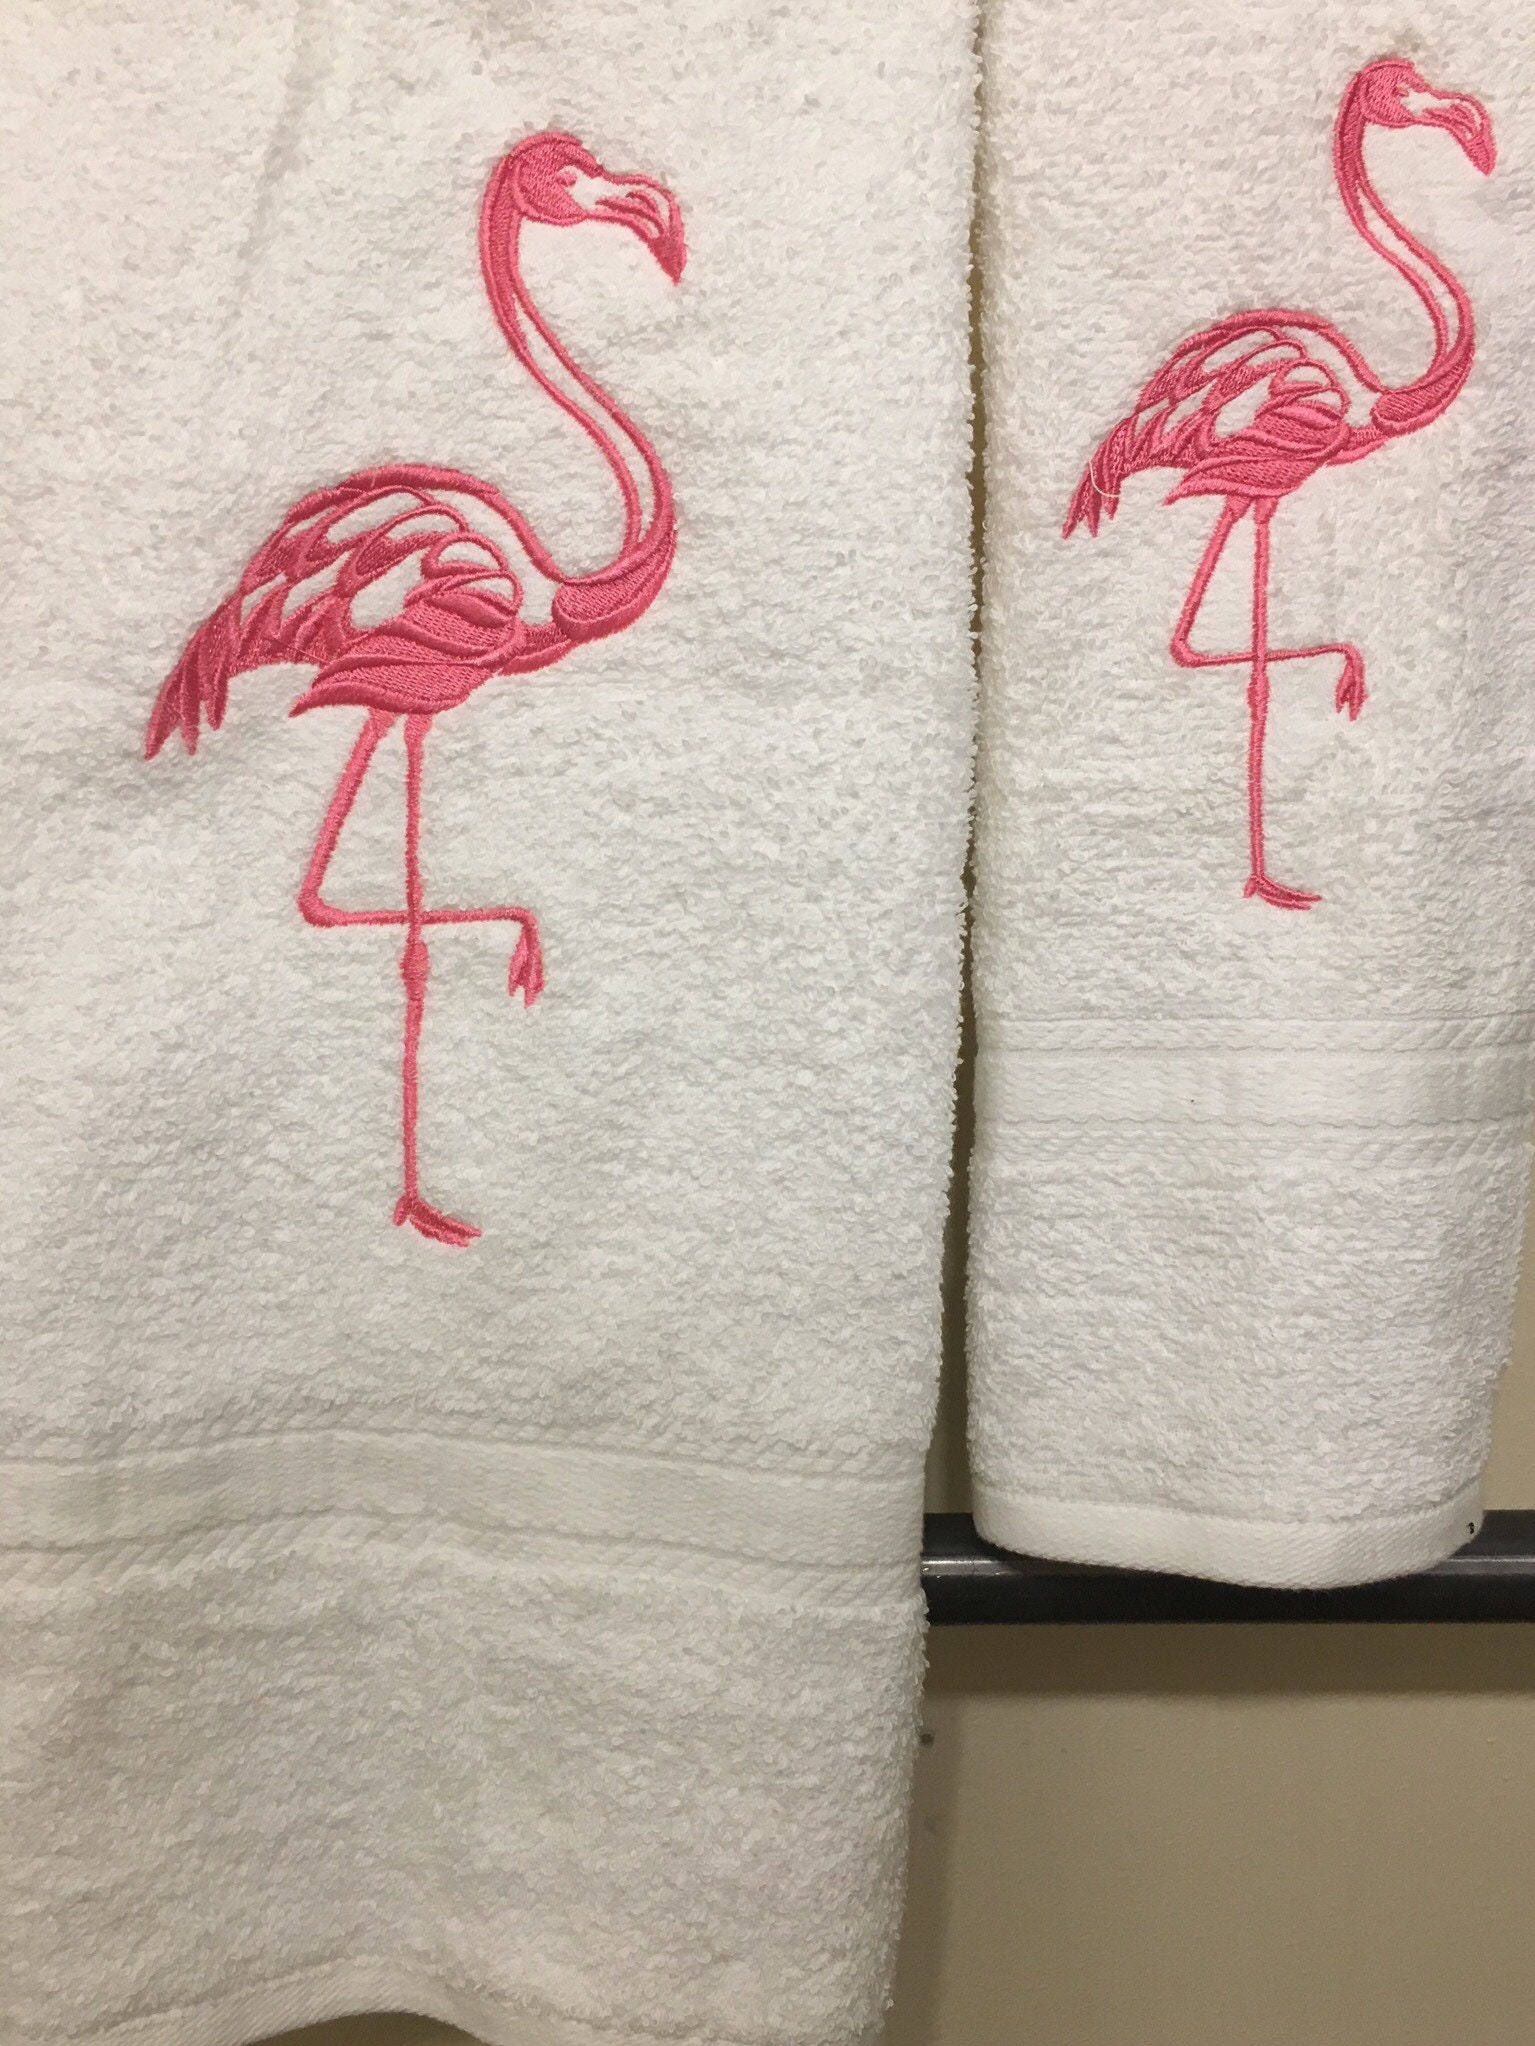 Flamingo Pattern Fingertip Towels, Hanging Towel For Wiping Hands, Highly  Absorbent & Quick Drying Dish Towels, Super Absorbent And Lint Free Towels,  Hanging Tie Towel For Bathroom Kitchen, Bathroom Supplies, Home Decor 